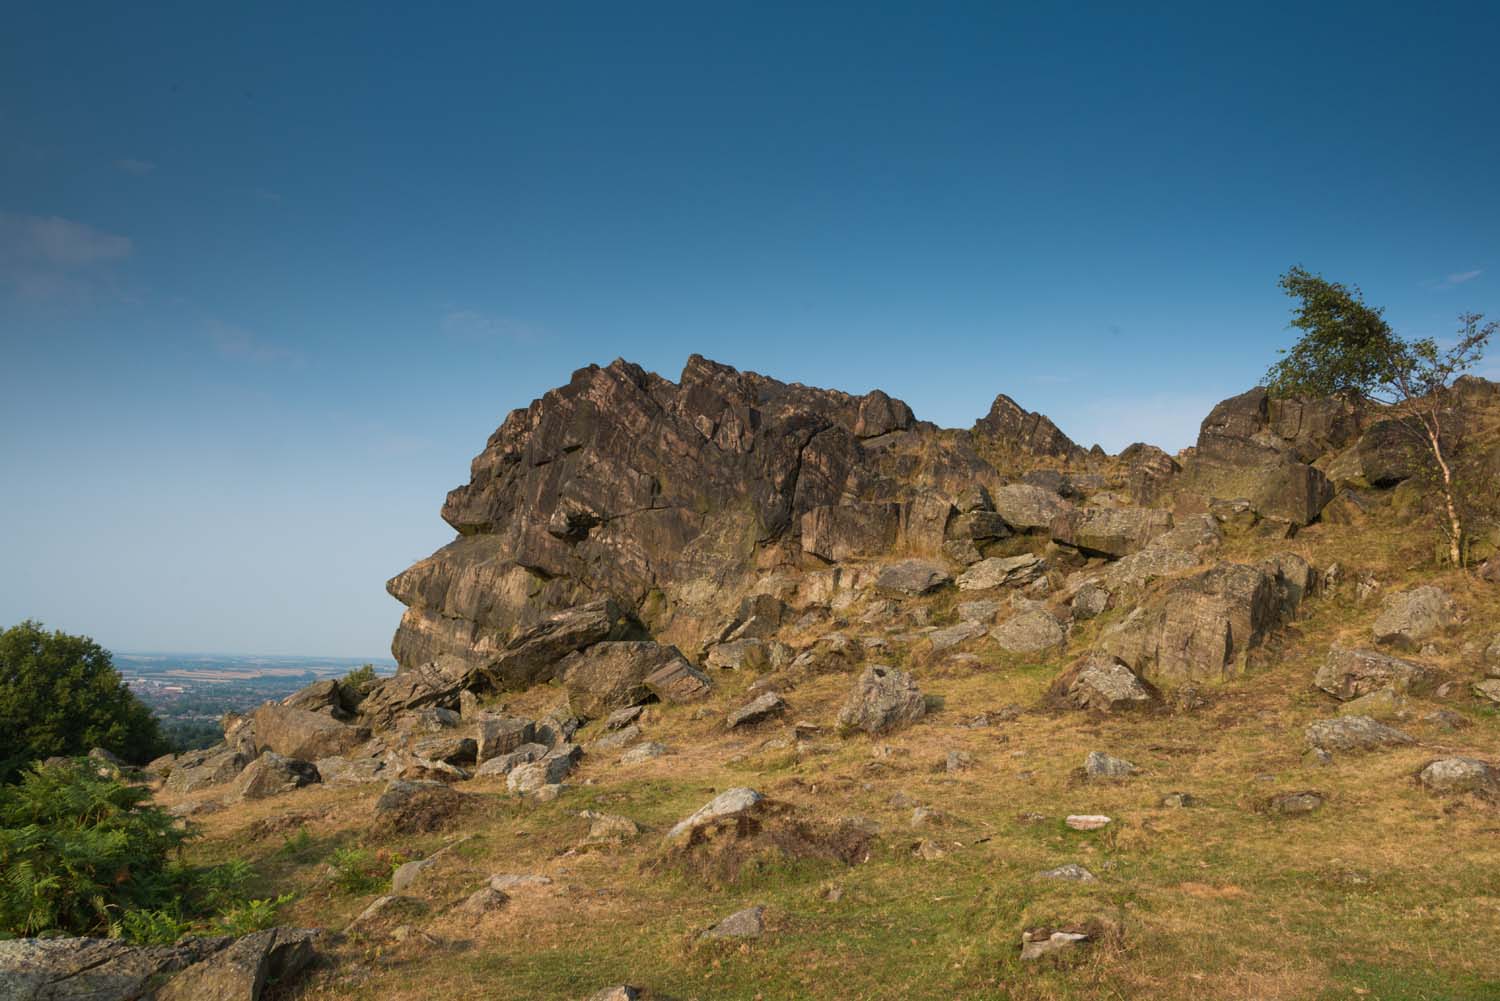 Rocky crags at Beacon Hill, known as the Old Man as they look like the face of a man.